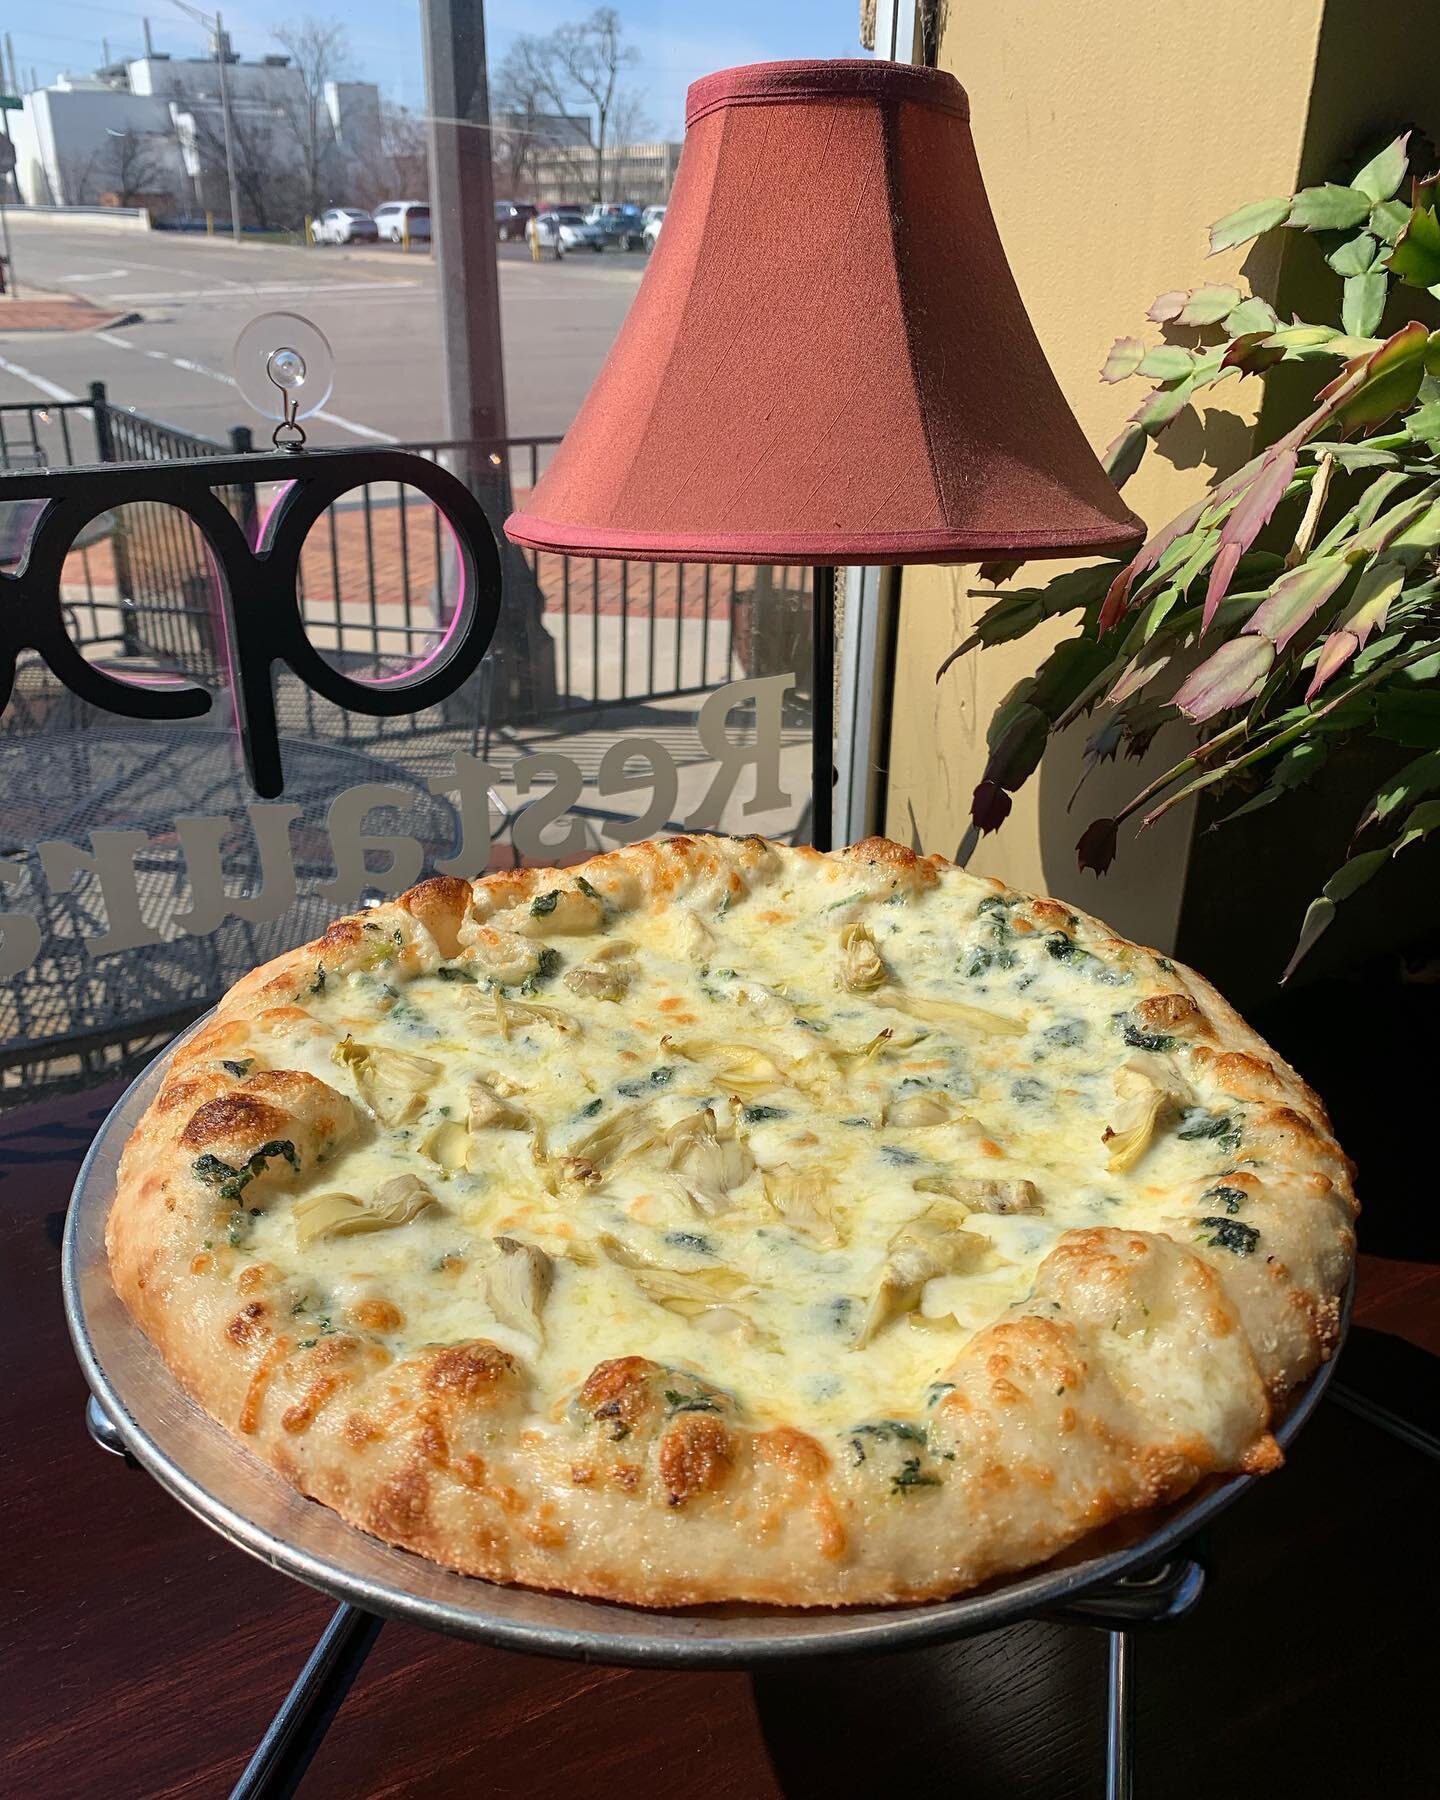 This weeks pizza special will really strangle your taste buds. Welcome to the line up, Artichoke Me Out&hellip;spinach dip base, house blend cheese, chopped artichokes, topped with roasted garlic. Get yours this week and next, before it disappears!